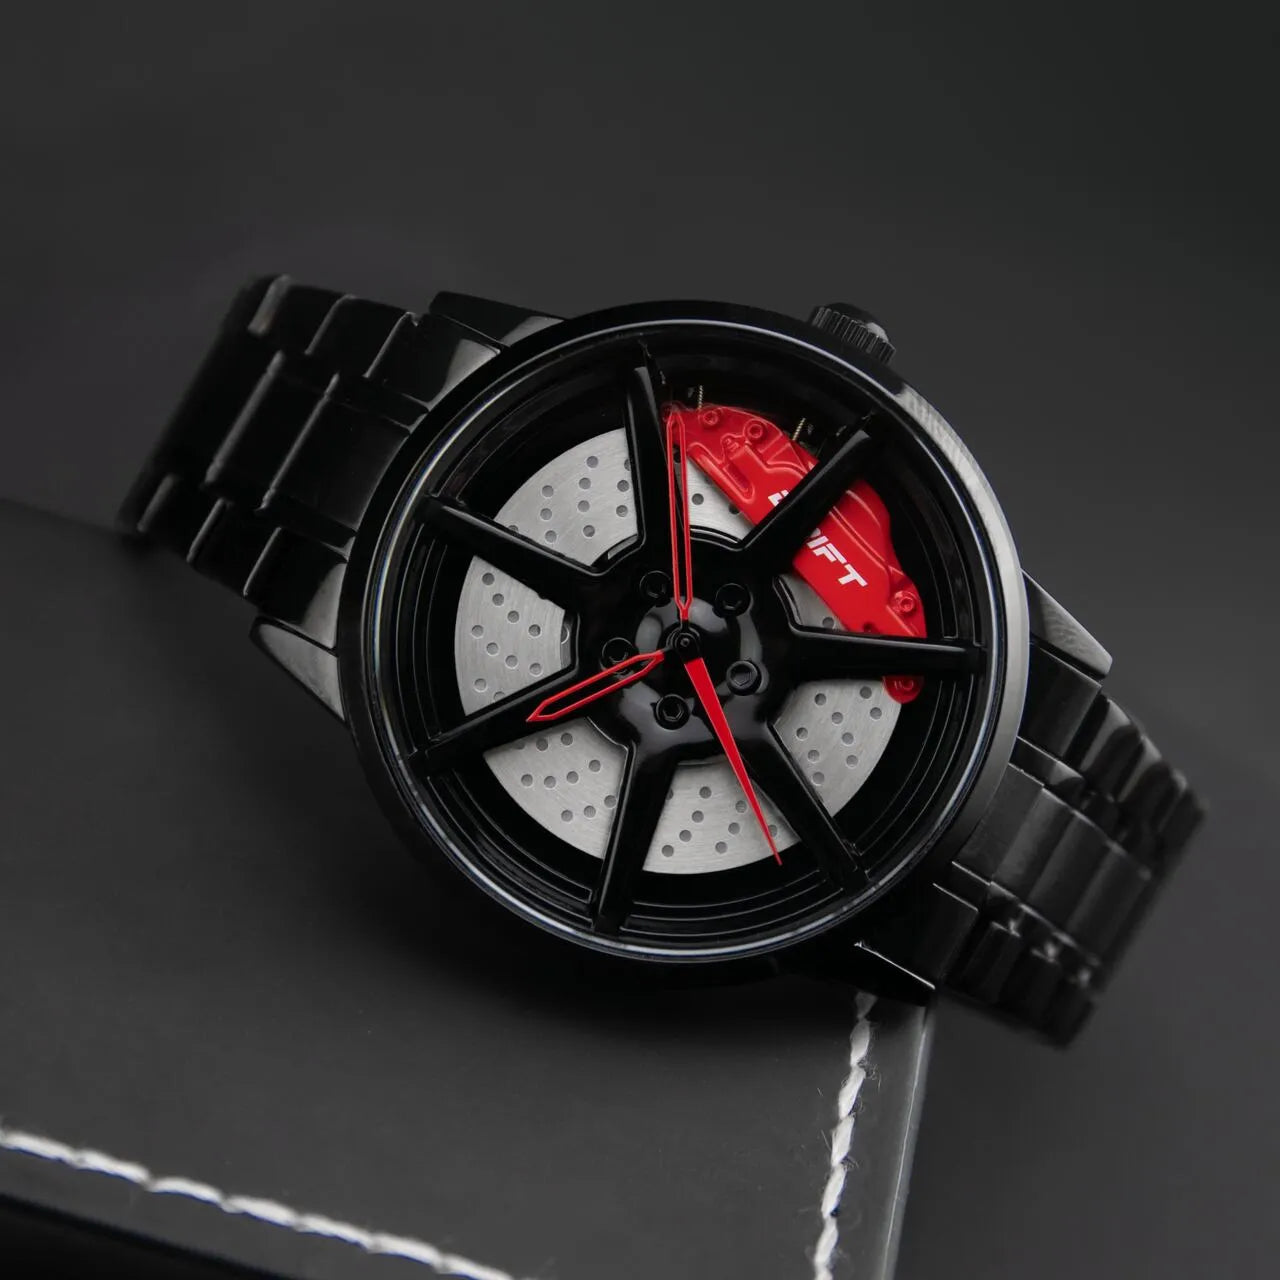 Elevate your style with our red Drift Rim Watch! Crafted by a German startup, these precision watches boast innovative design, engineered to captivate motorsport, tuning, and auto enthusiasts. #id_46744374608202